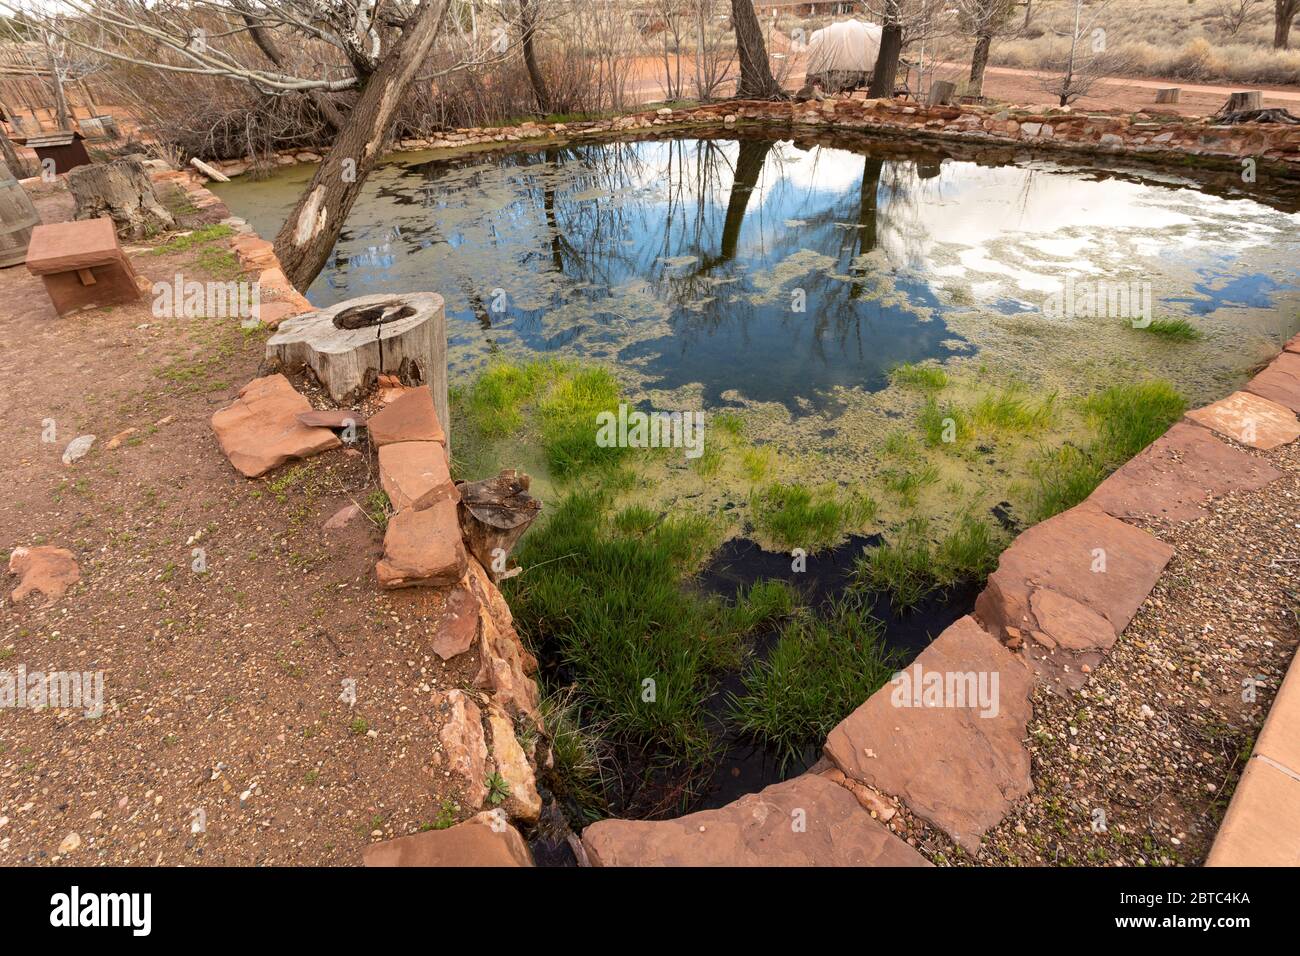 AZ00379-00...ARIZONA - Man-made pond filled by Pipe Spring making this area an oasis in the dry prairie lands at Pipe Spring National Monument. Stock Photo